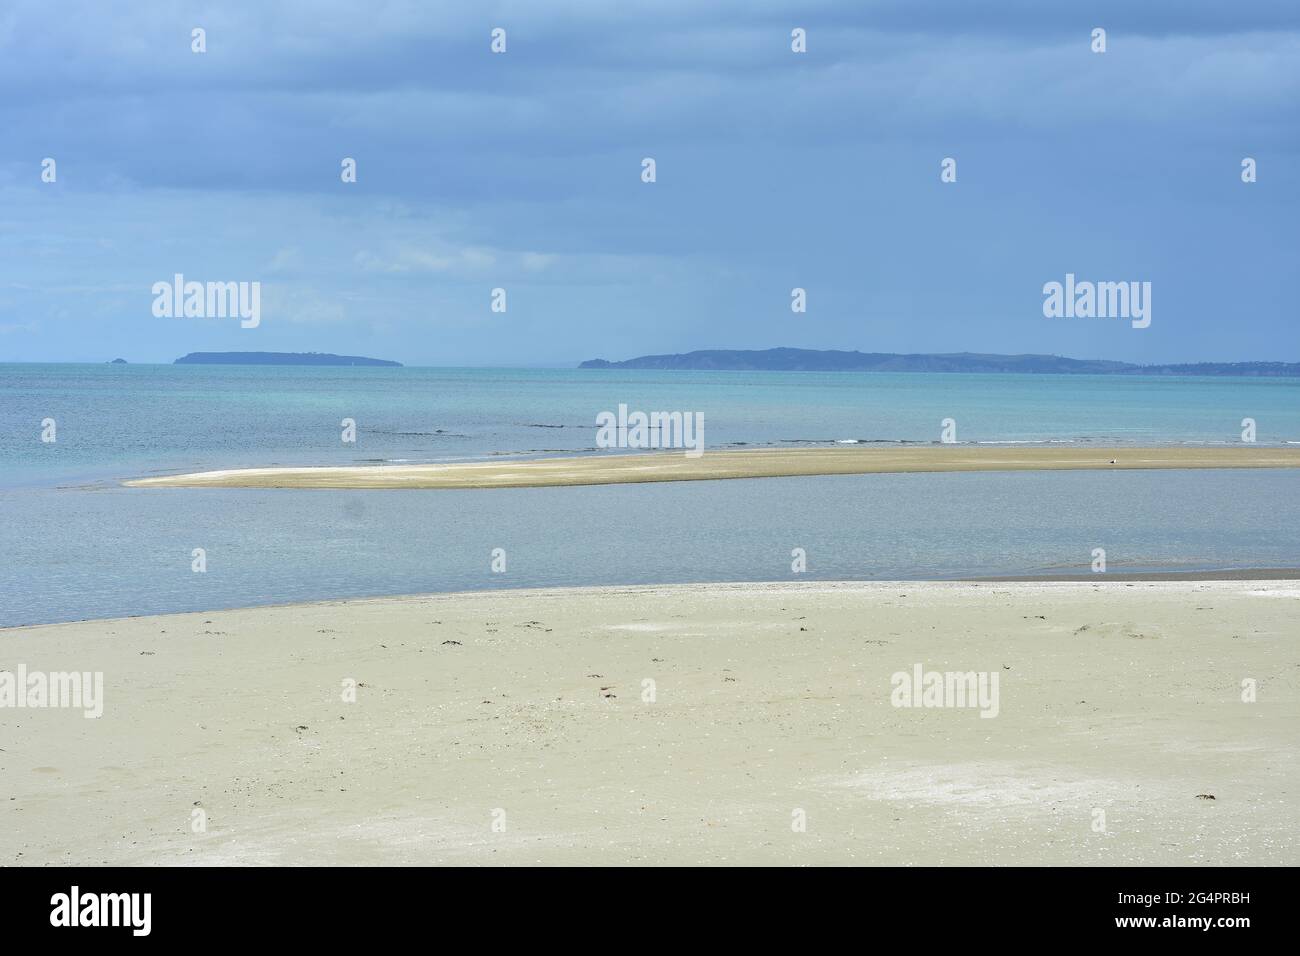 Patch of sand in calm sea close to flat sandy beach exposed at low tide. Stock Photo